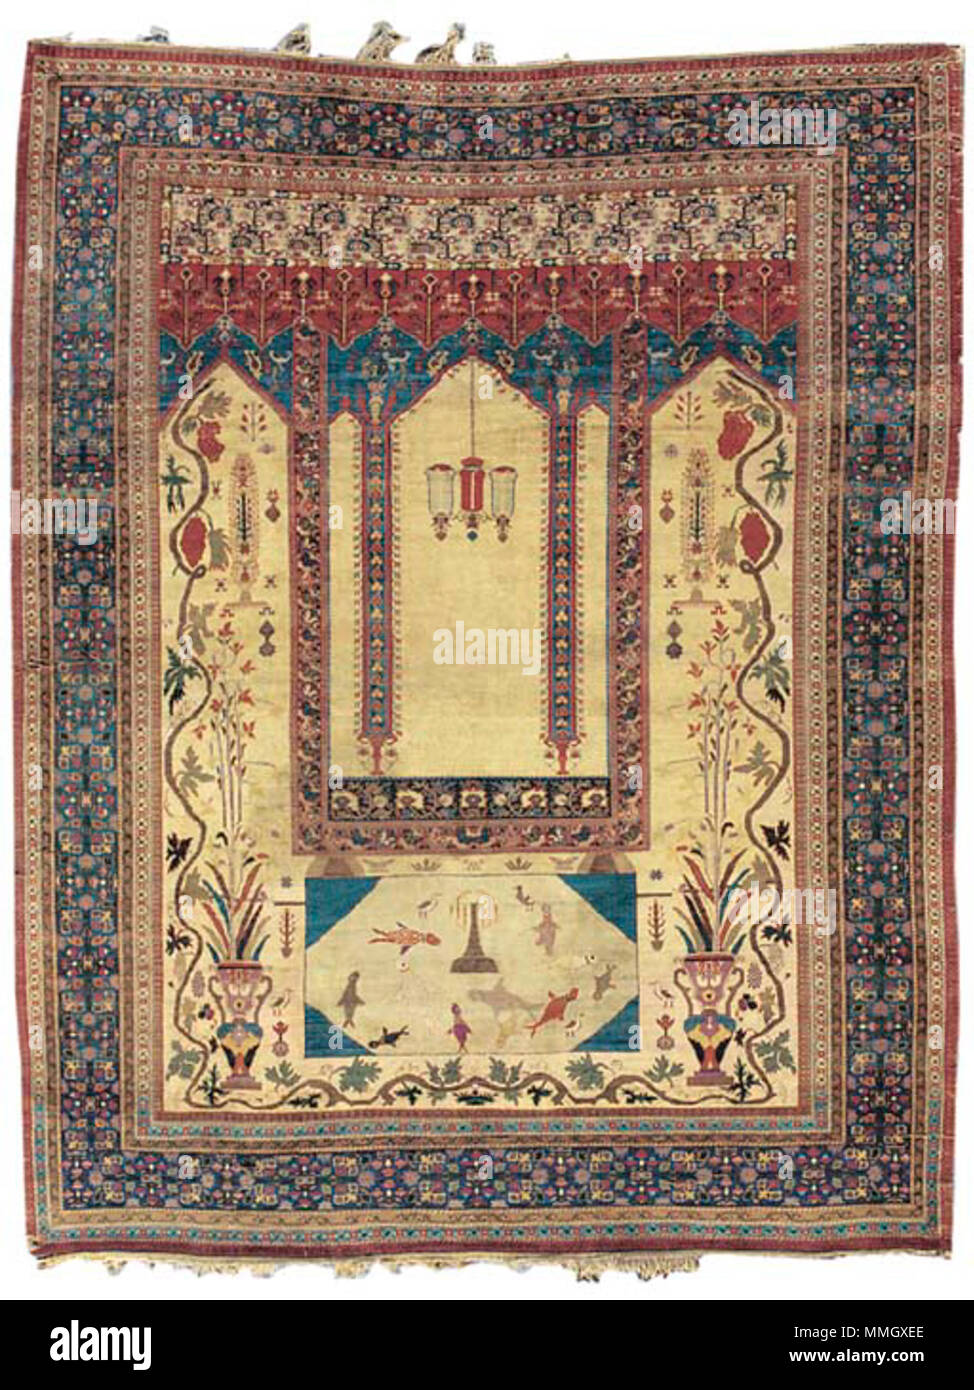 English: 'A SILK DECCANI PRAYER RUG. Central India, last quarter 19th  century or earlier. The ivory field with a pair of polychrome baluster  vases issuing delicate floral sprays surrounded by bold